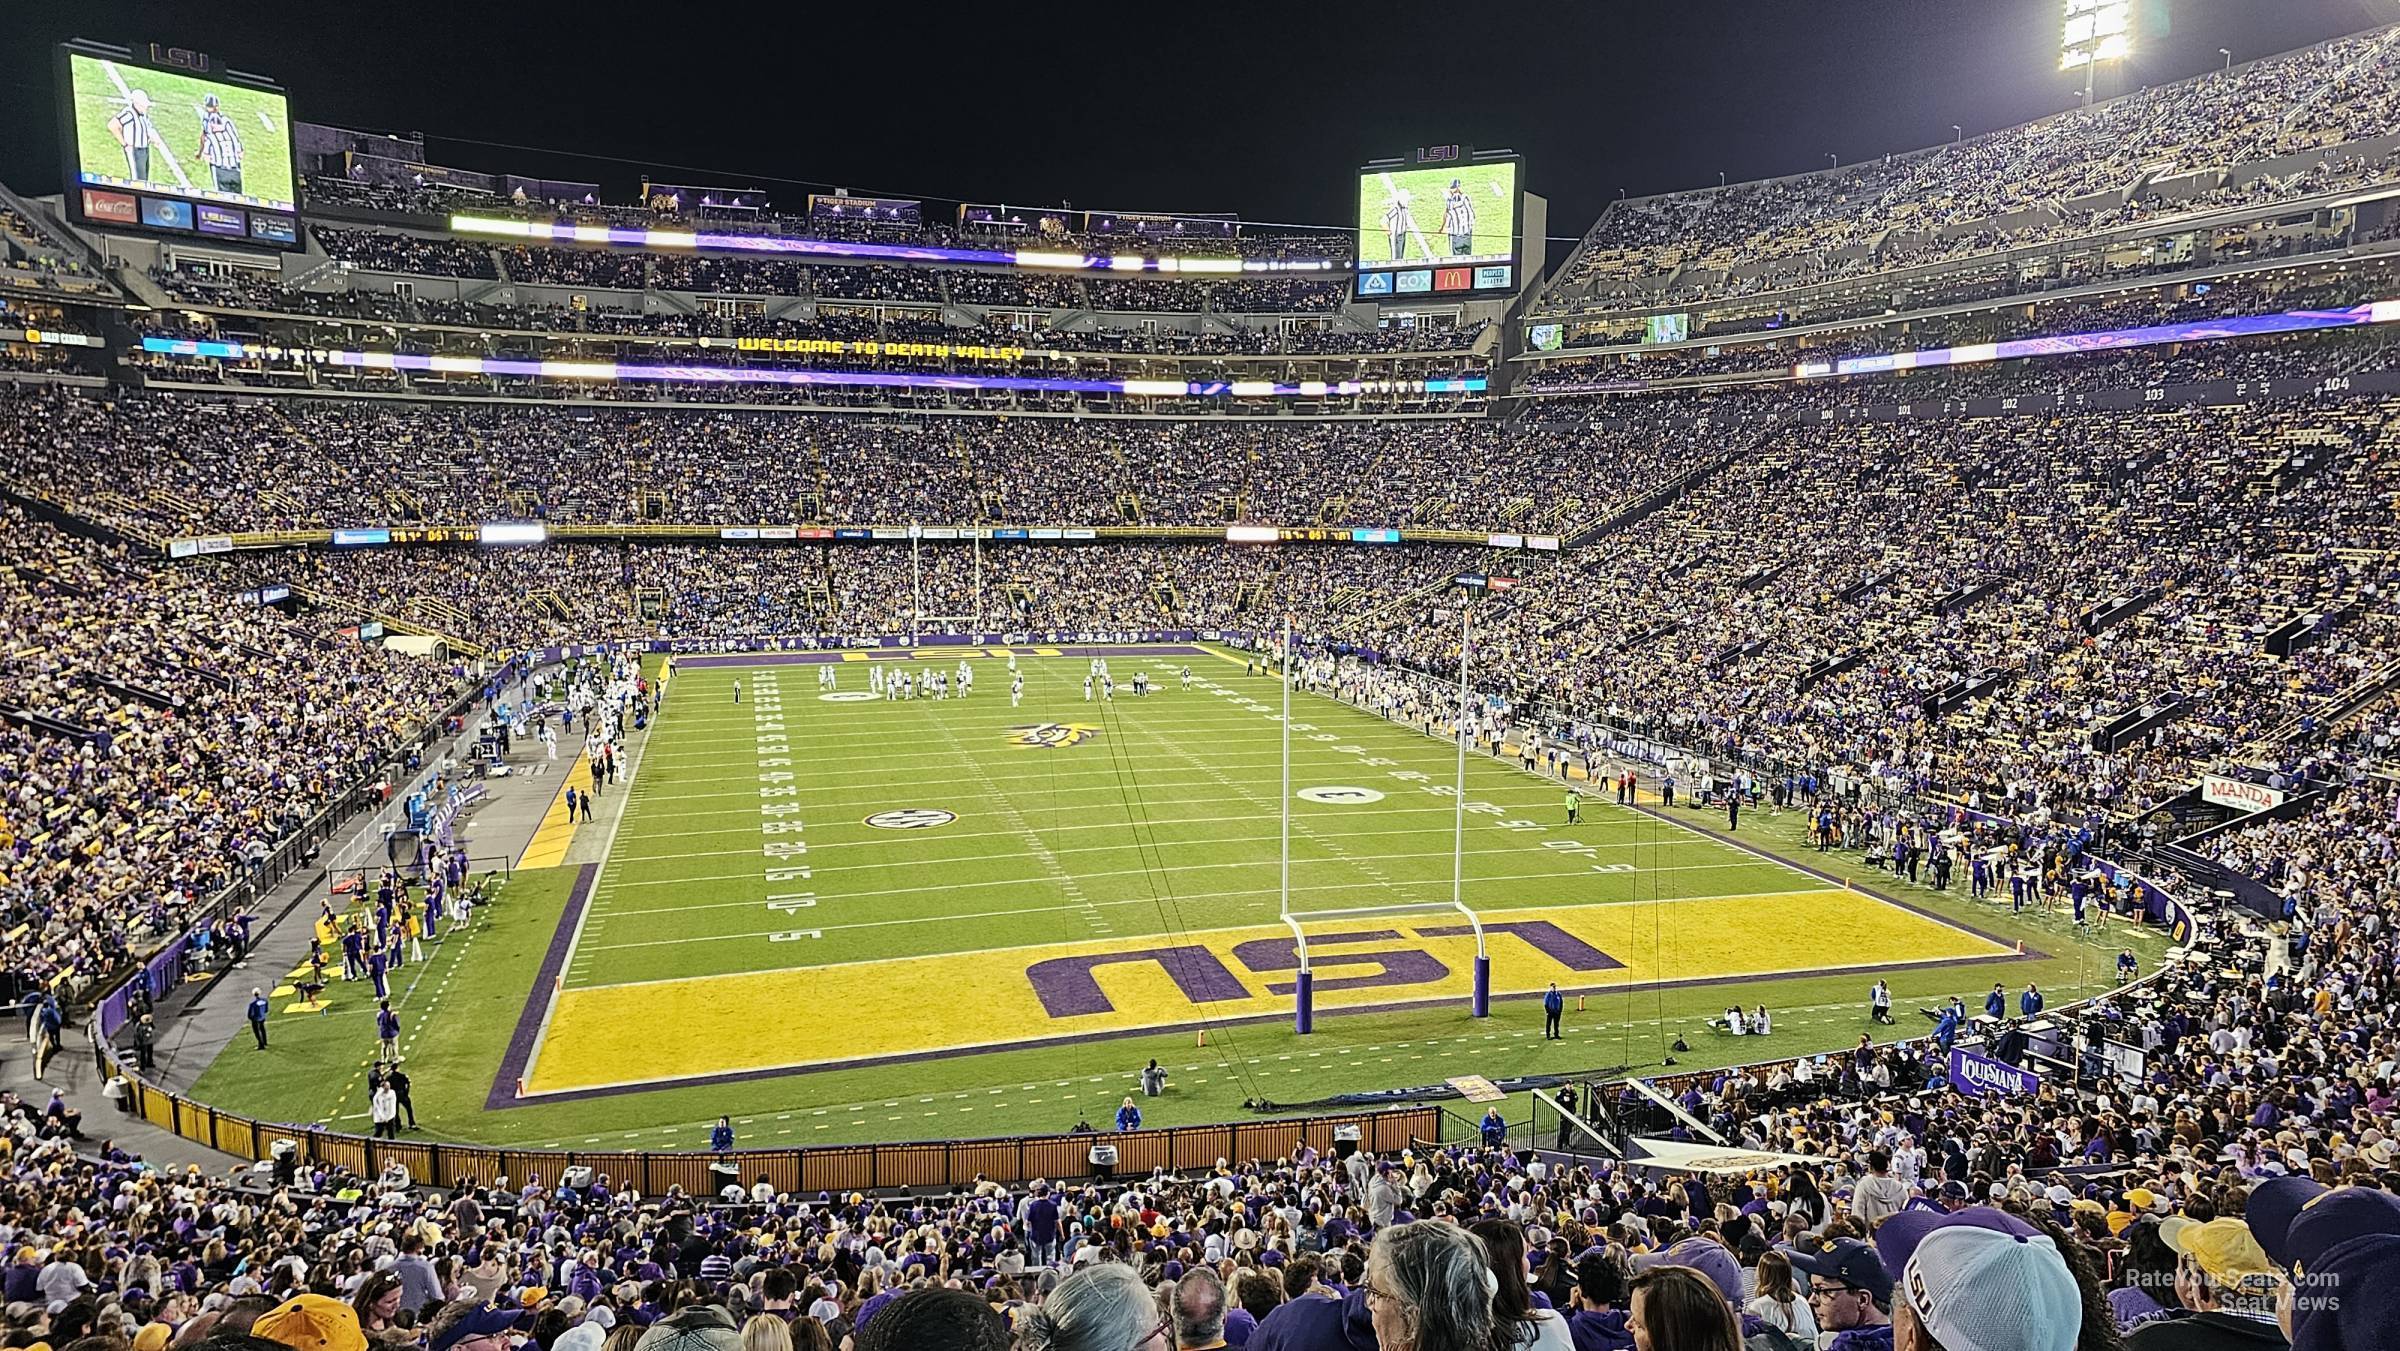 section 235, row 1 seat view  - tiger stadium